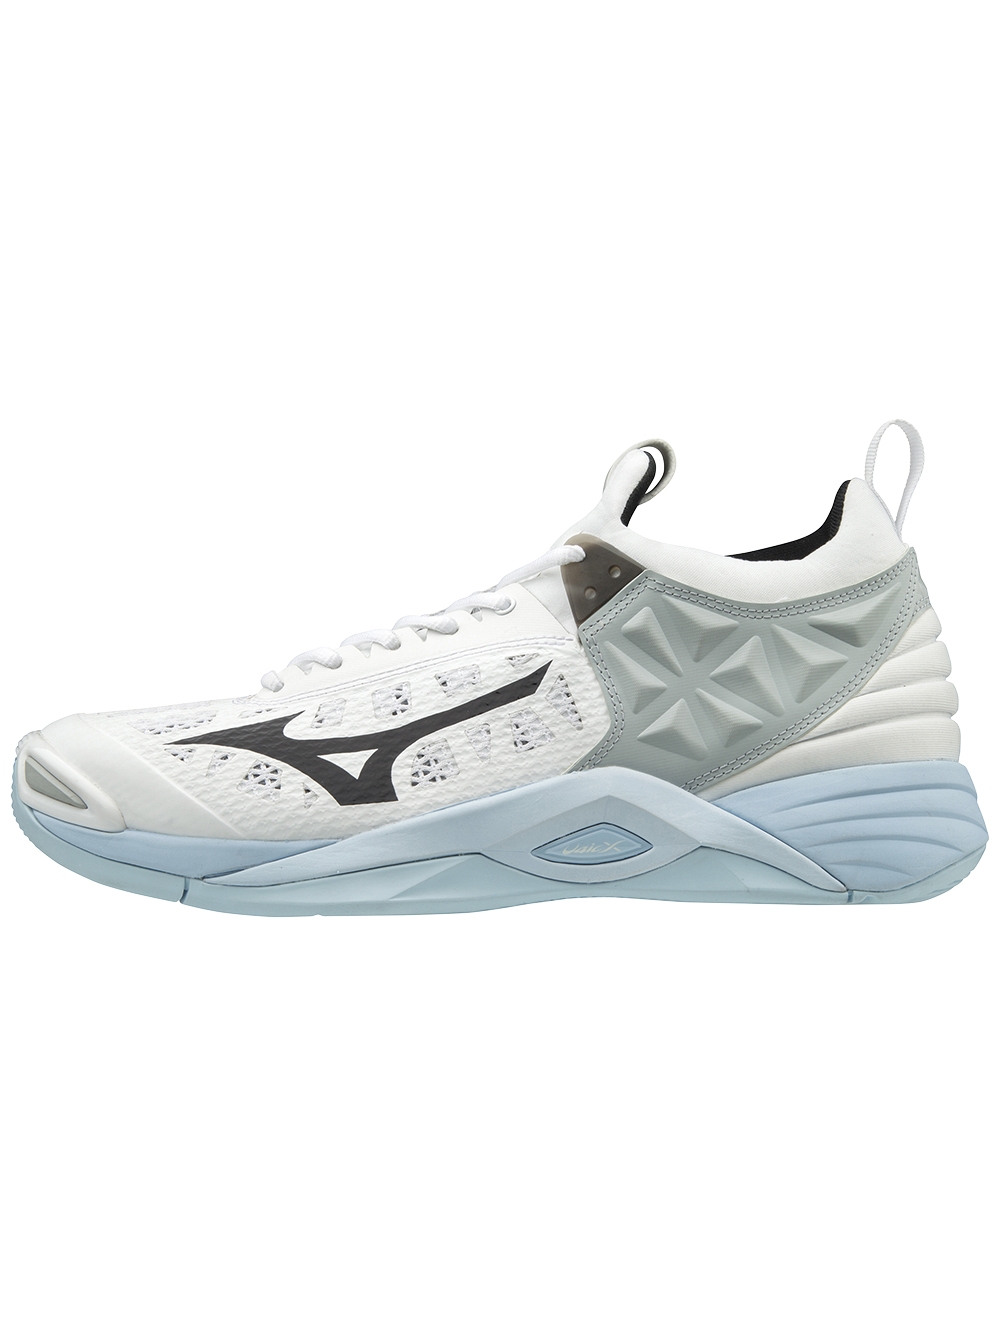 Mizuno Womens Wave Momentum Shoes | Volleyball